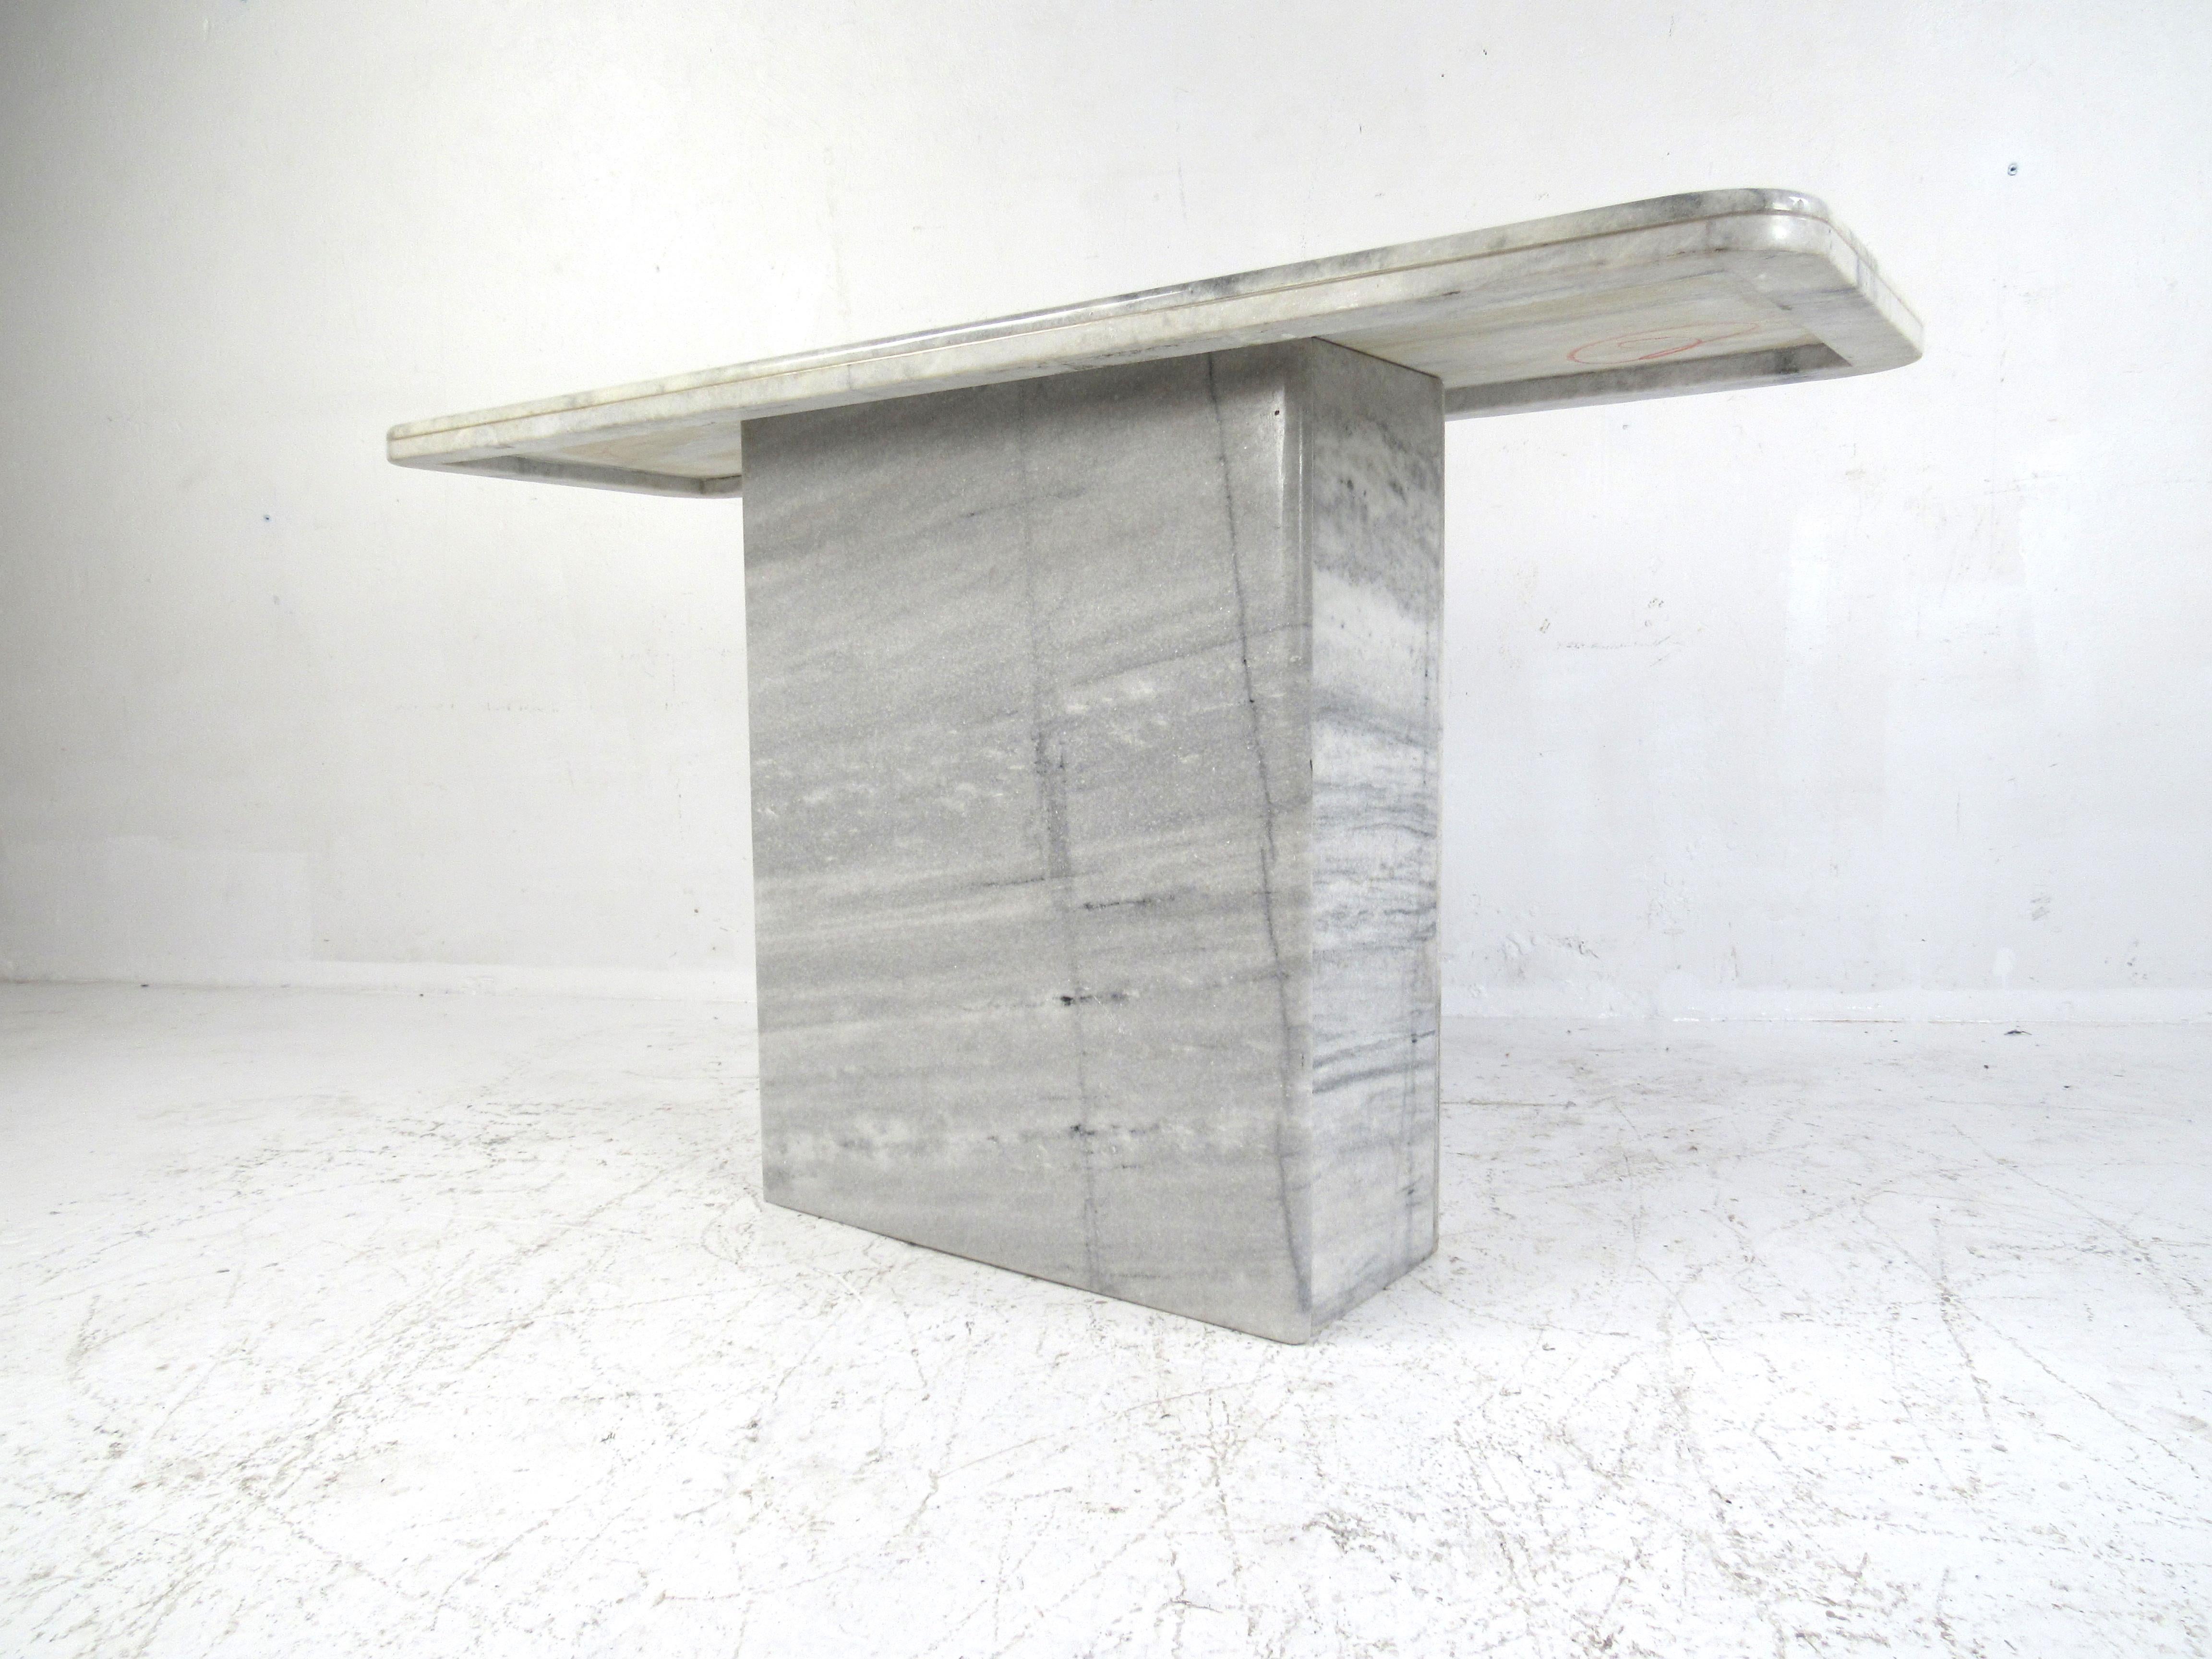 A beautiful Mid-Century Modern console table with a pedestal base and a rectangular top. This lovely marble hall table has a tone of grey and white, allowing it to fit the scheme in any setting. This table looks great in any home, business, or